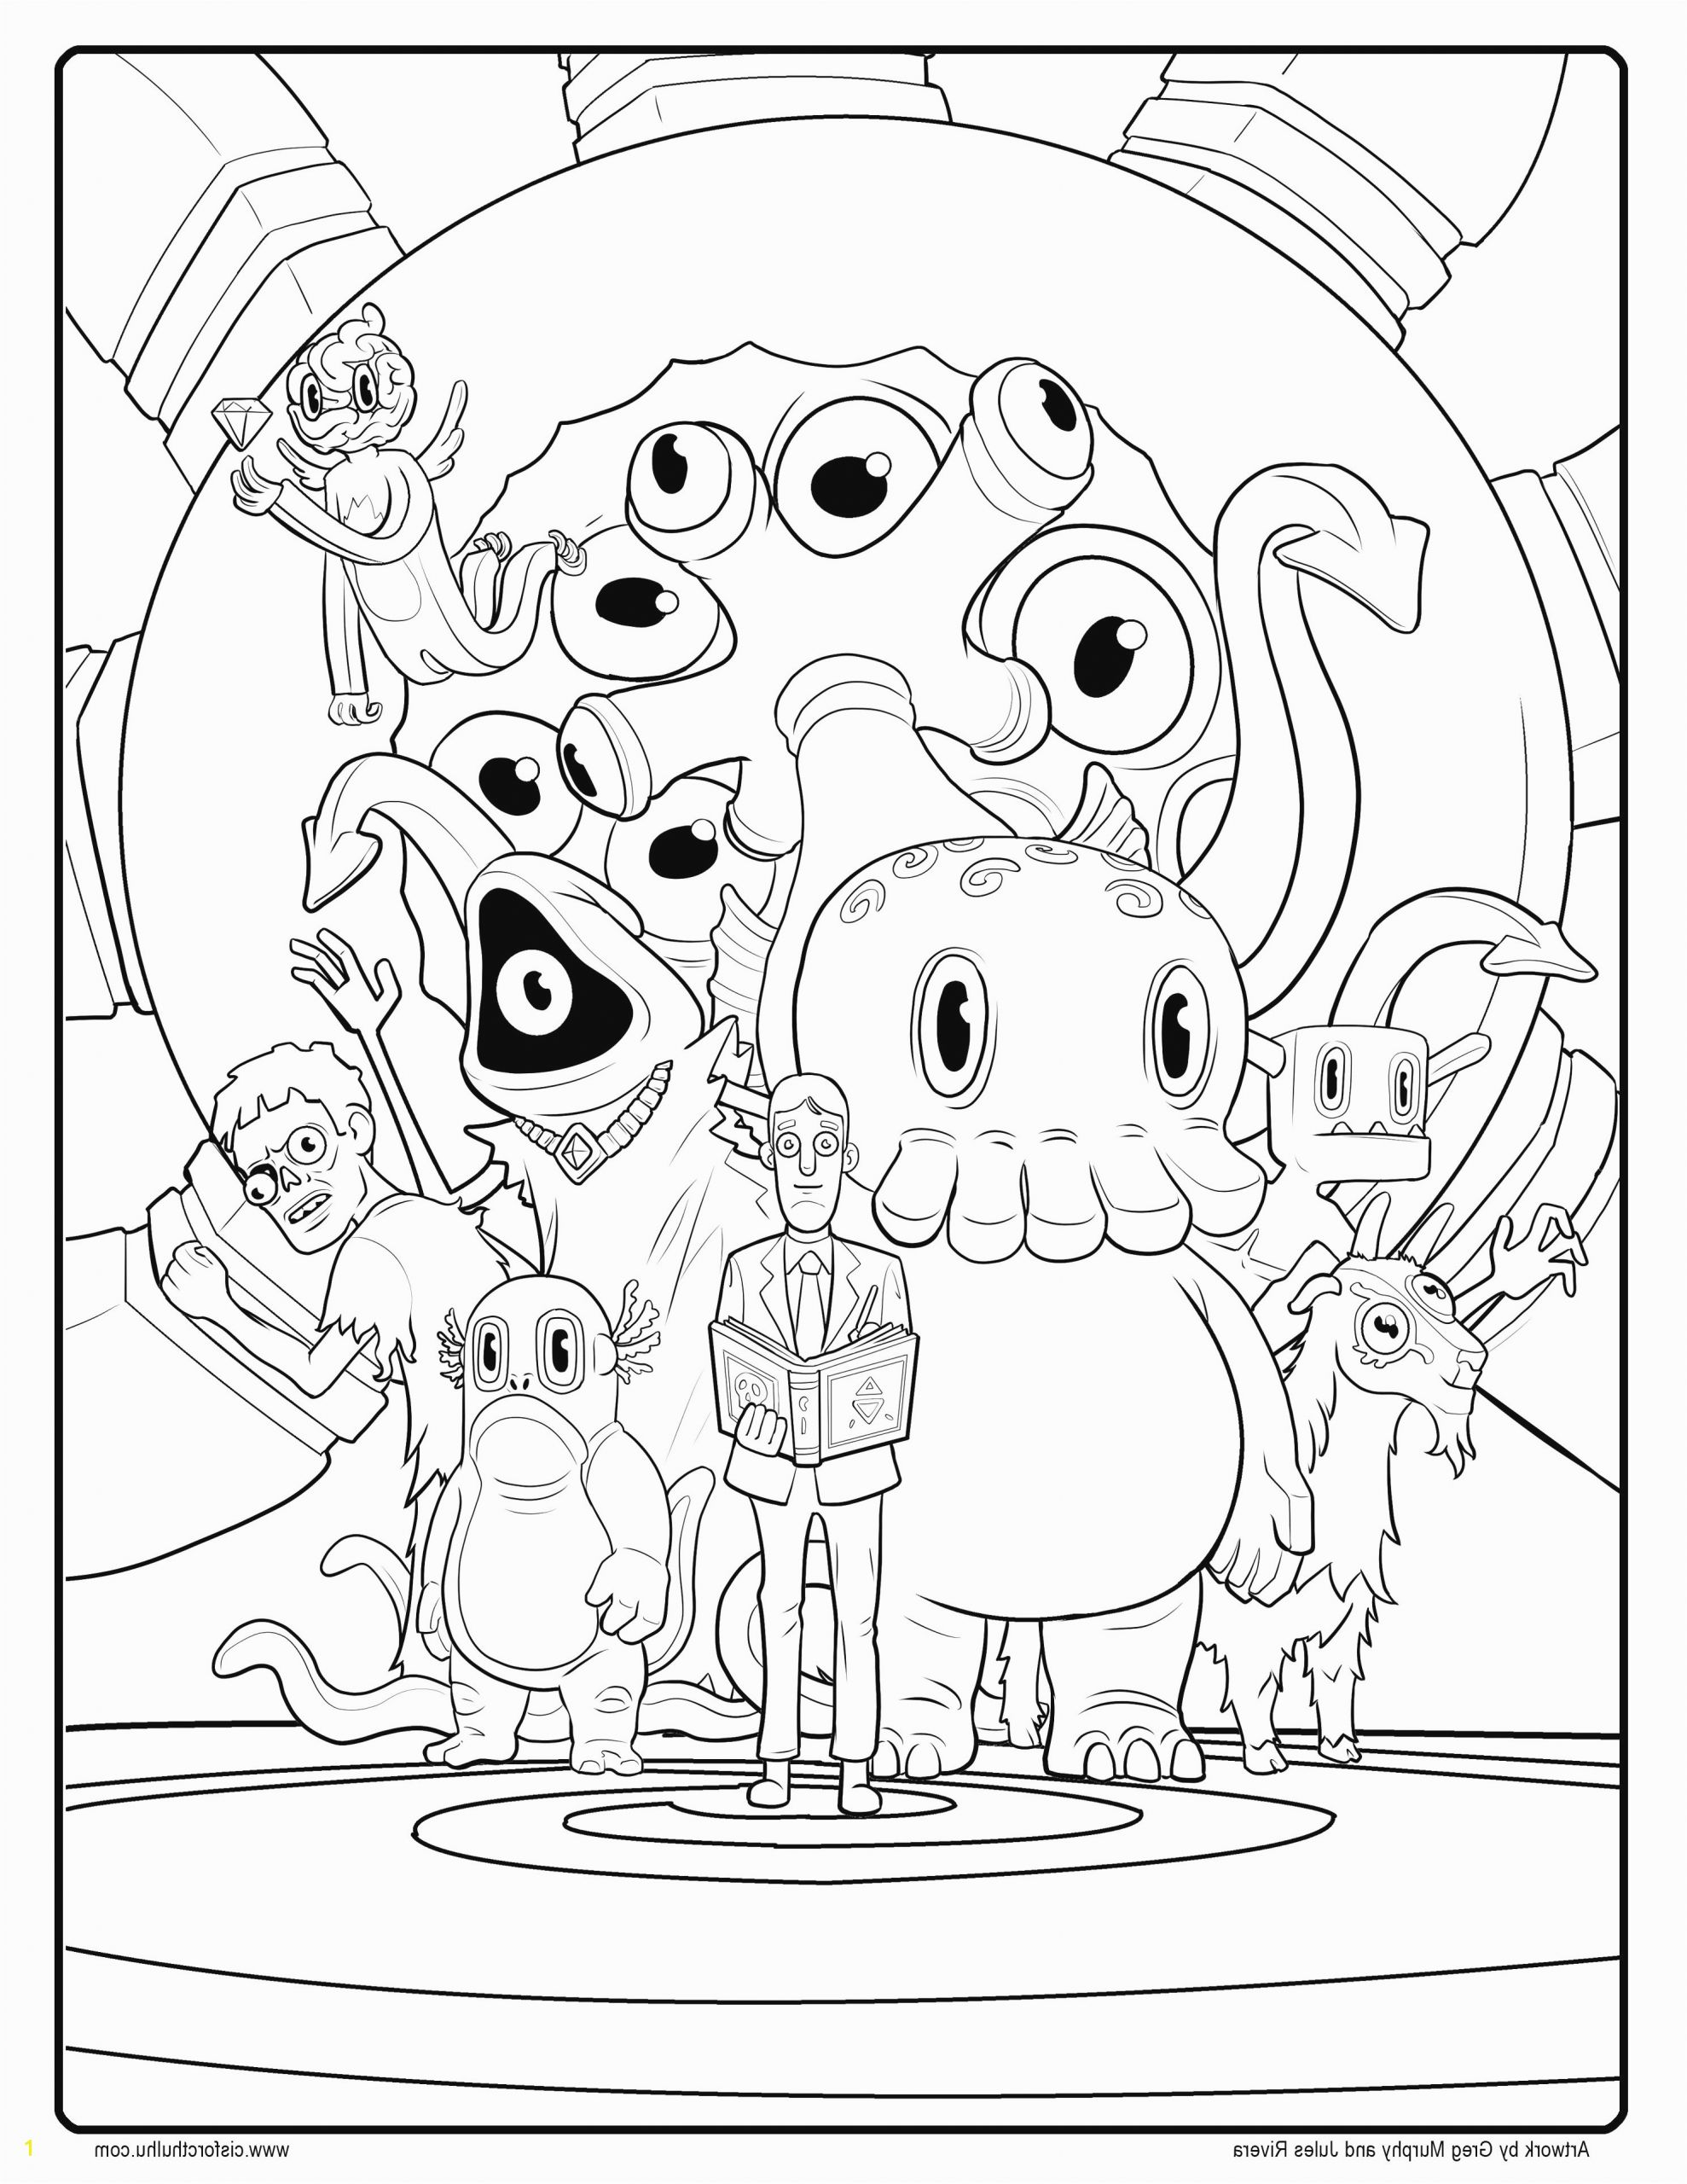 mice coloring page inspirational photos mickey mouse printables coloring pages of mice coloring page